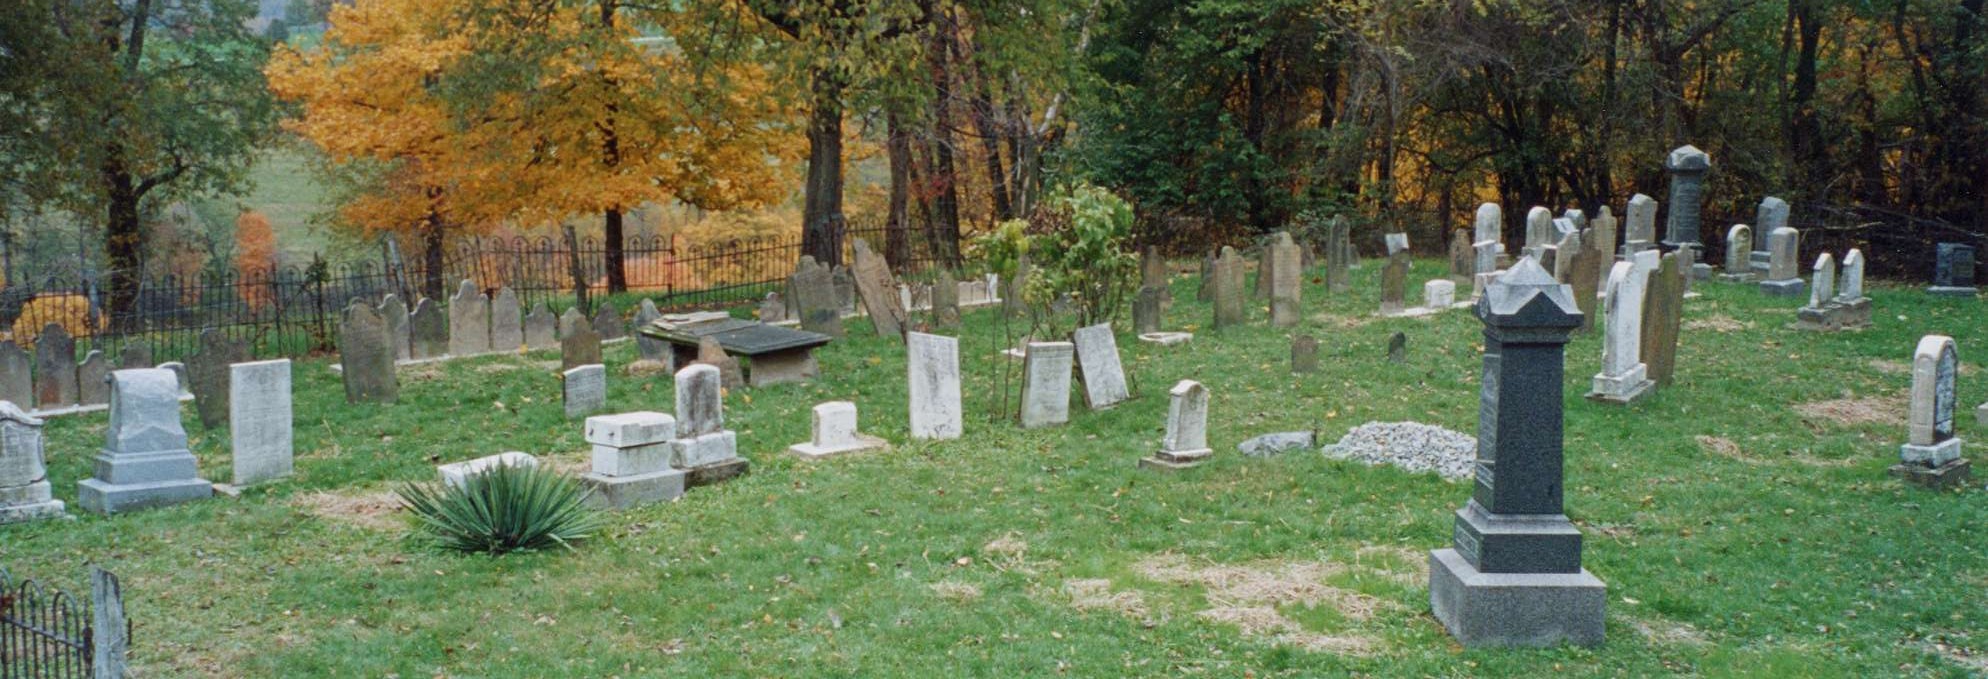 Hill Family Cemetery